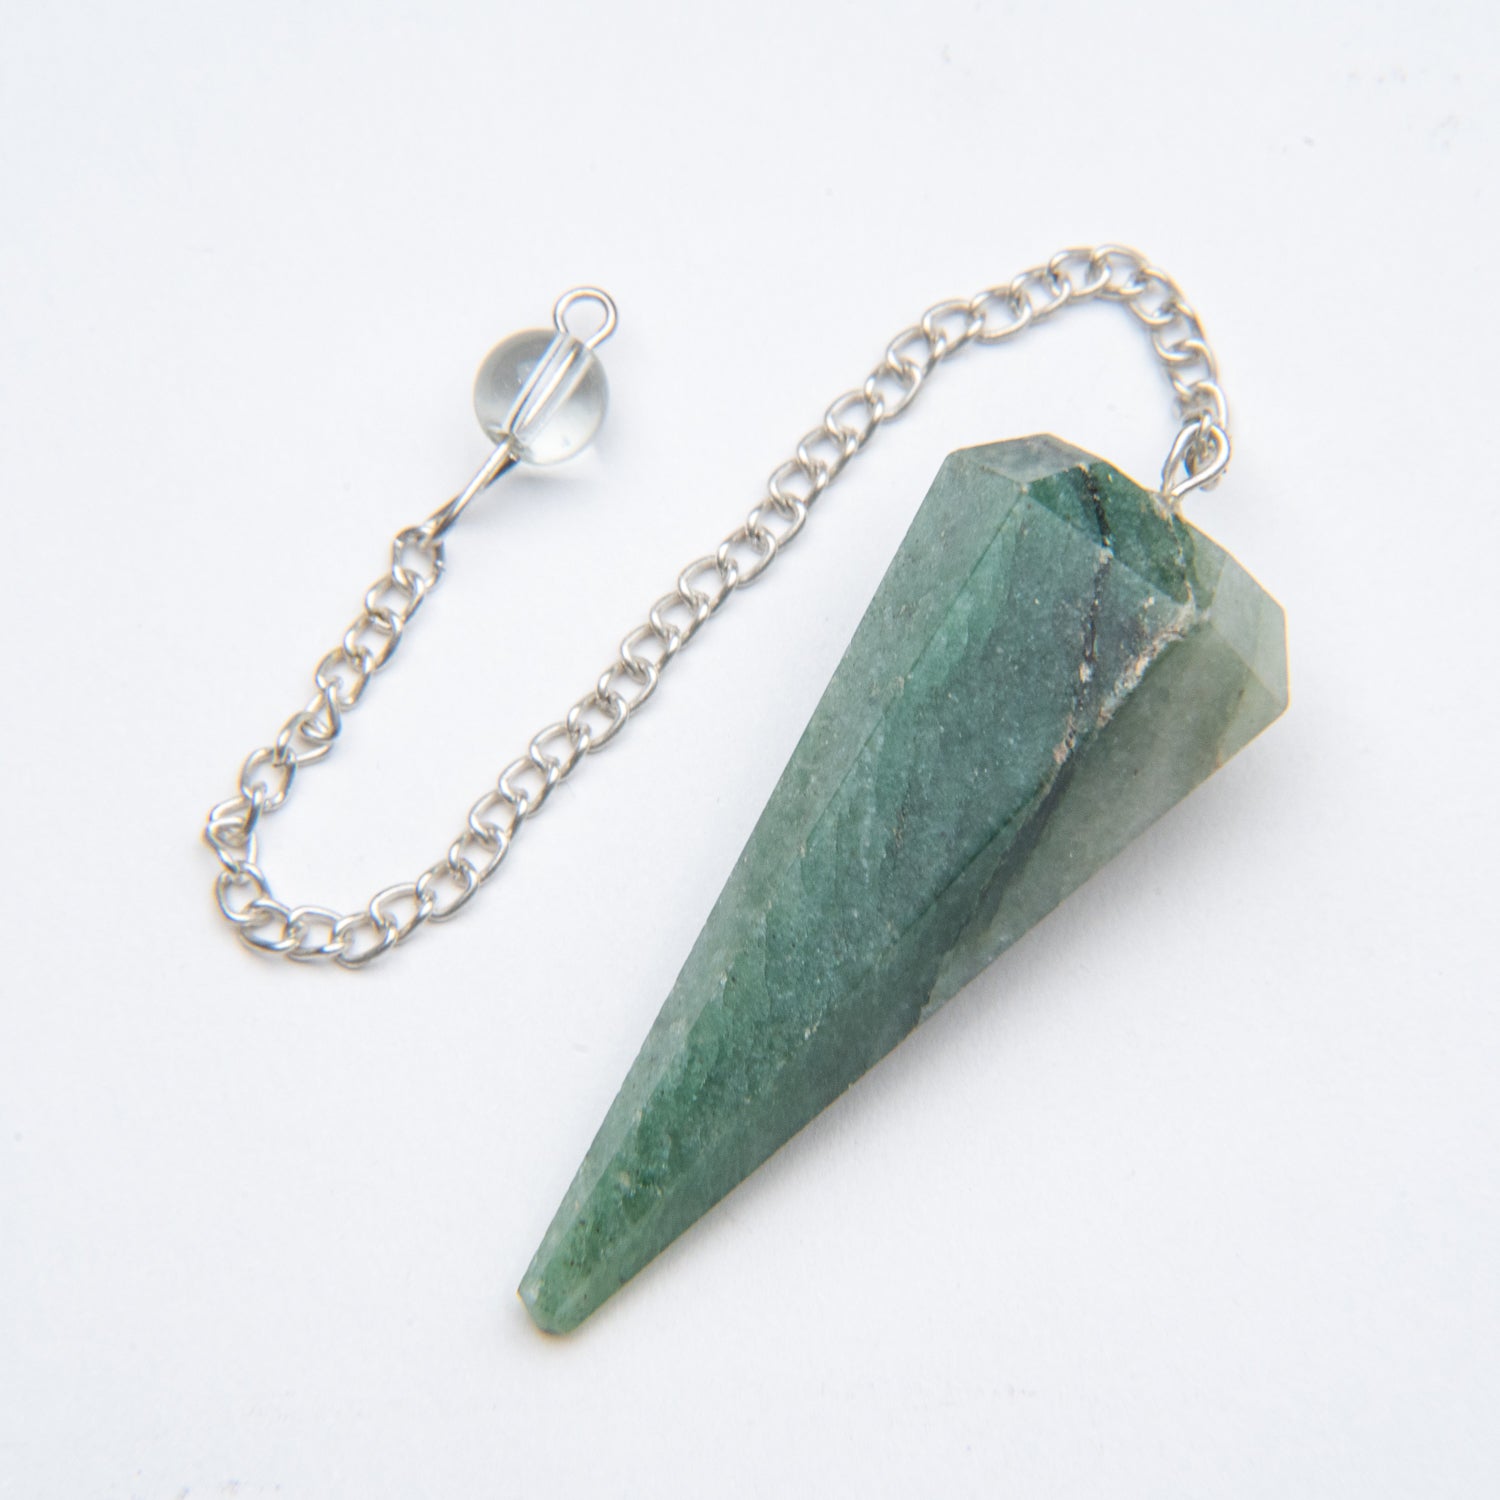 Genuine Polished Green Aventuine Pendulum (with Chain) with black velvet pouch